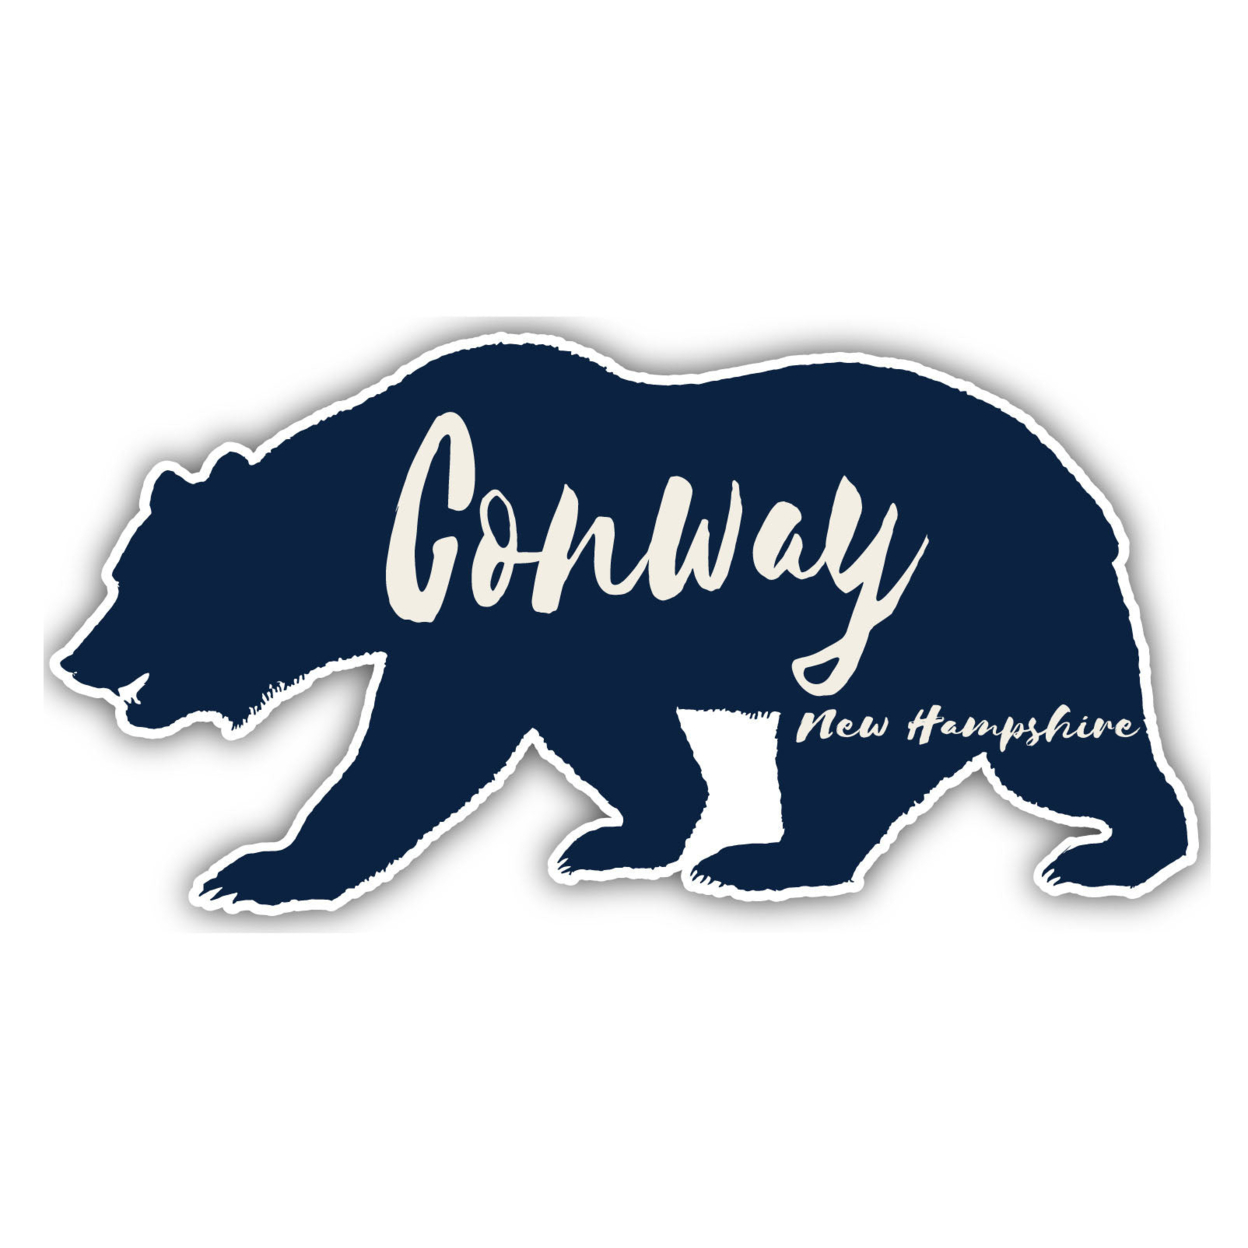 Conway New Hampshire Souvenir Decorative Stickers (Choose Theme And Size) - 4-Pack, 12-Inch, Great Outdoors